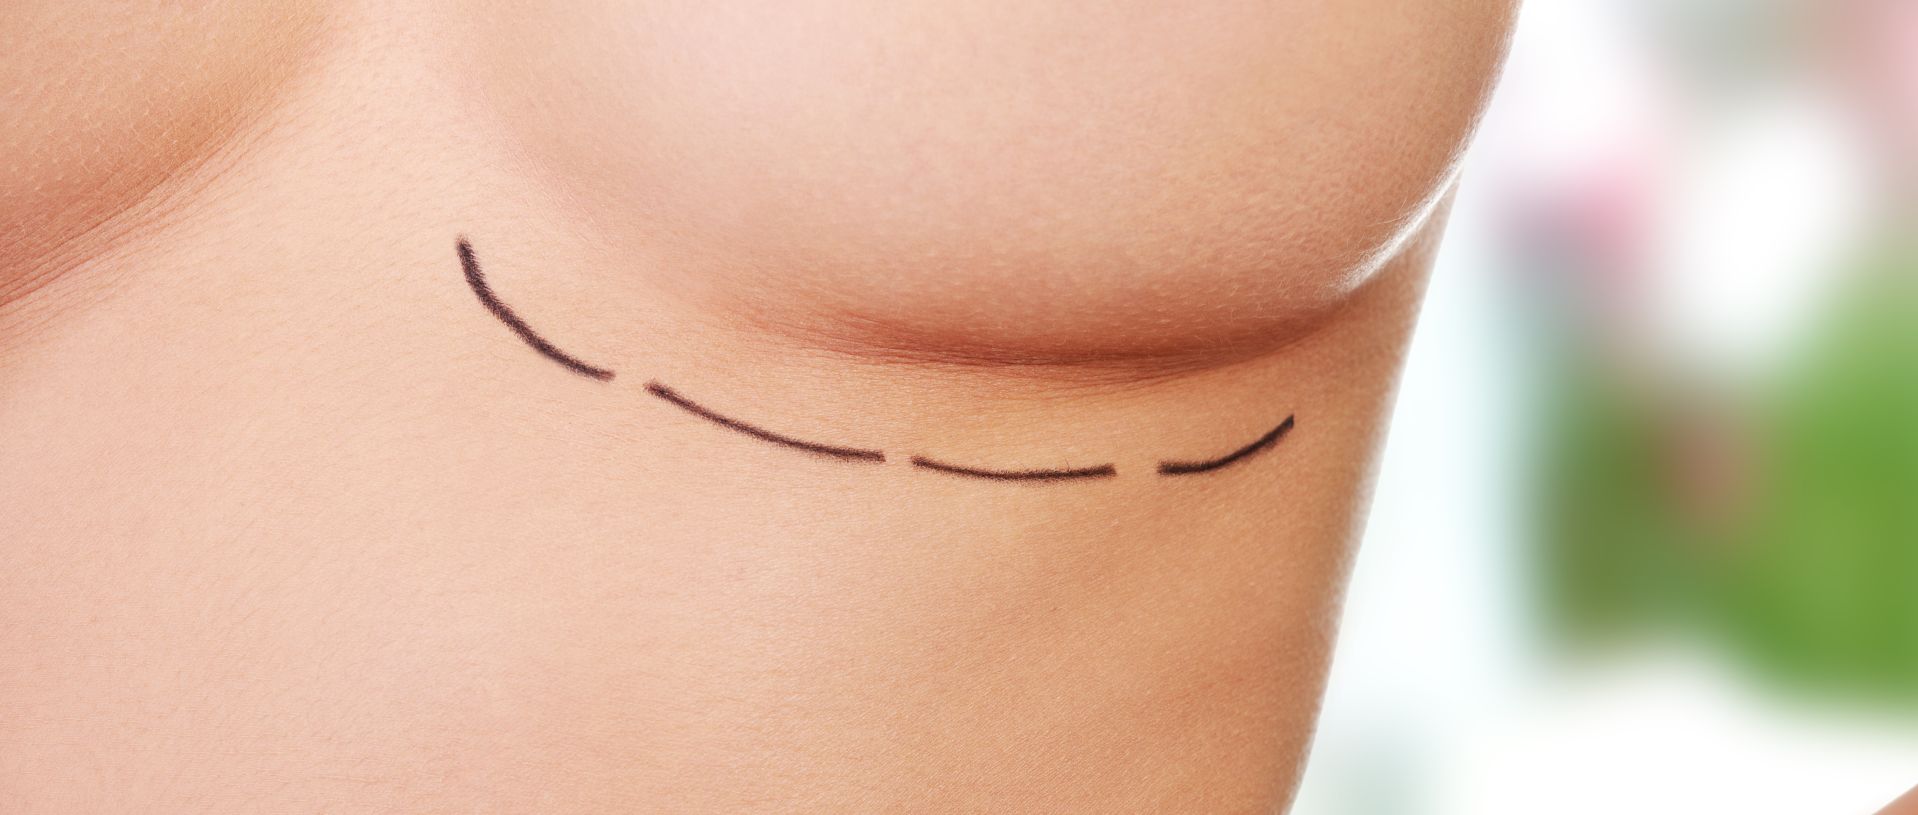 woman breast marked, breast augmantation